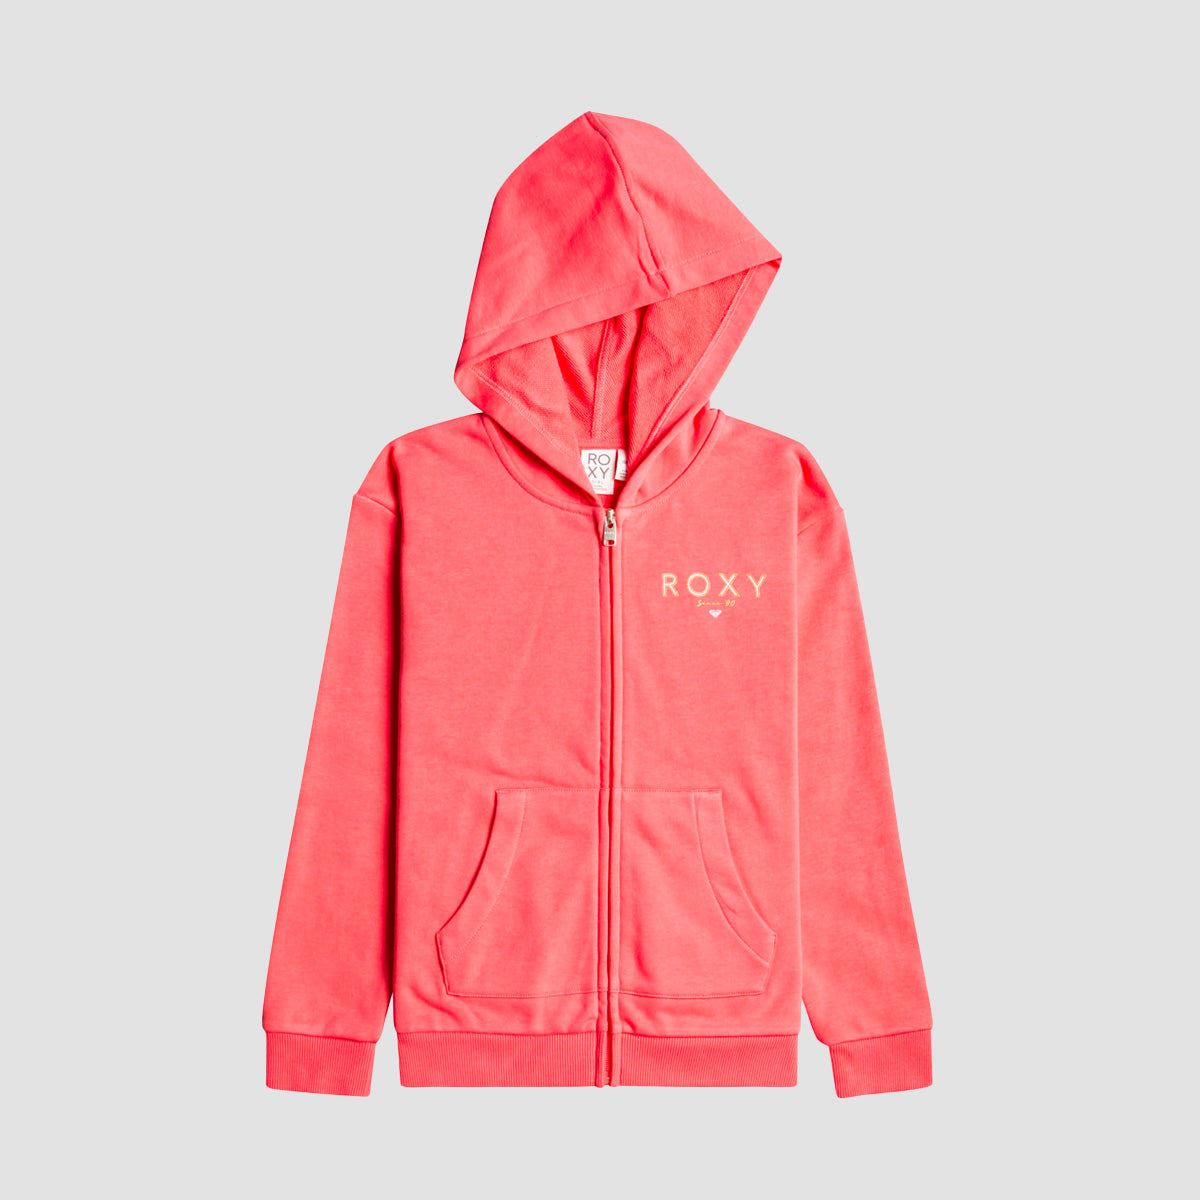 Roxy Happiness Forever Zip Hoodie Sun Kissed Coral - Girls